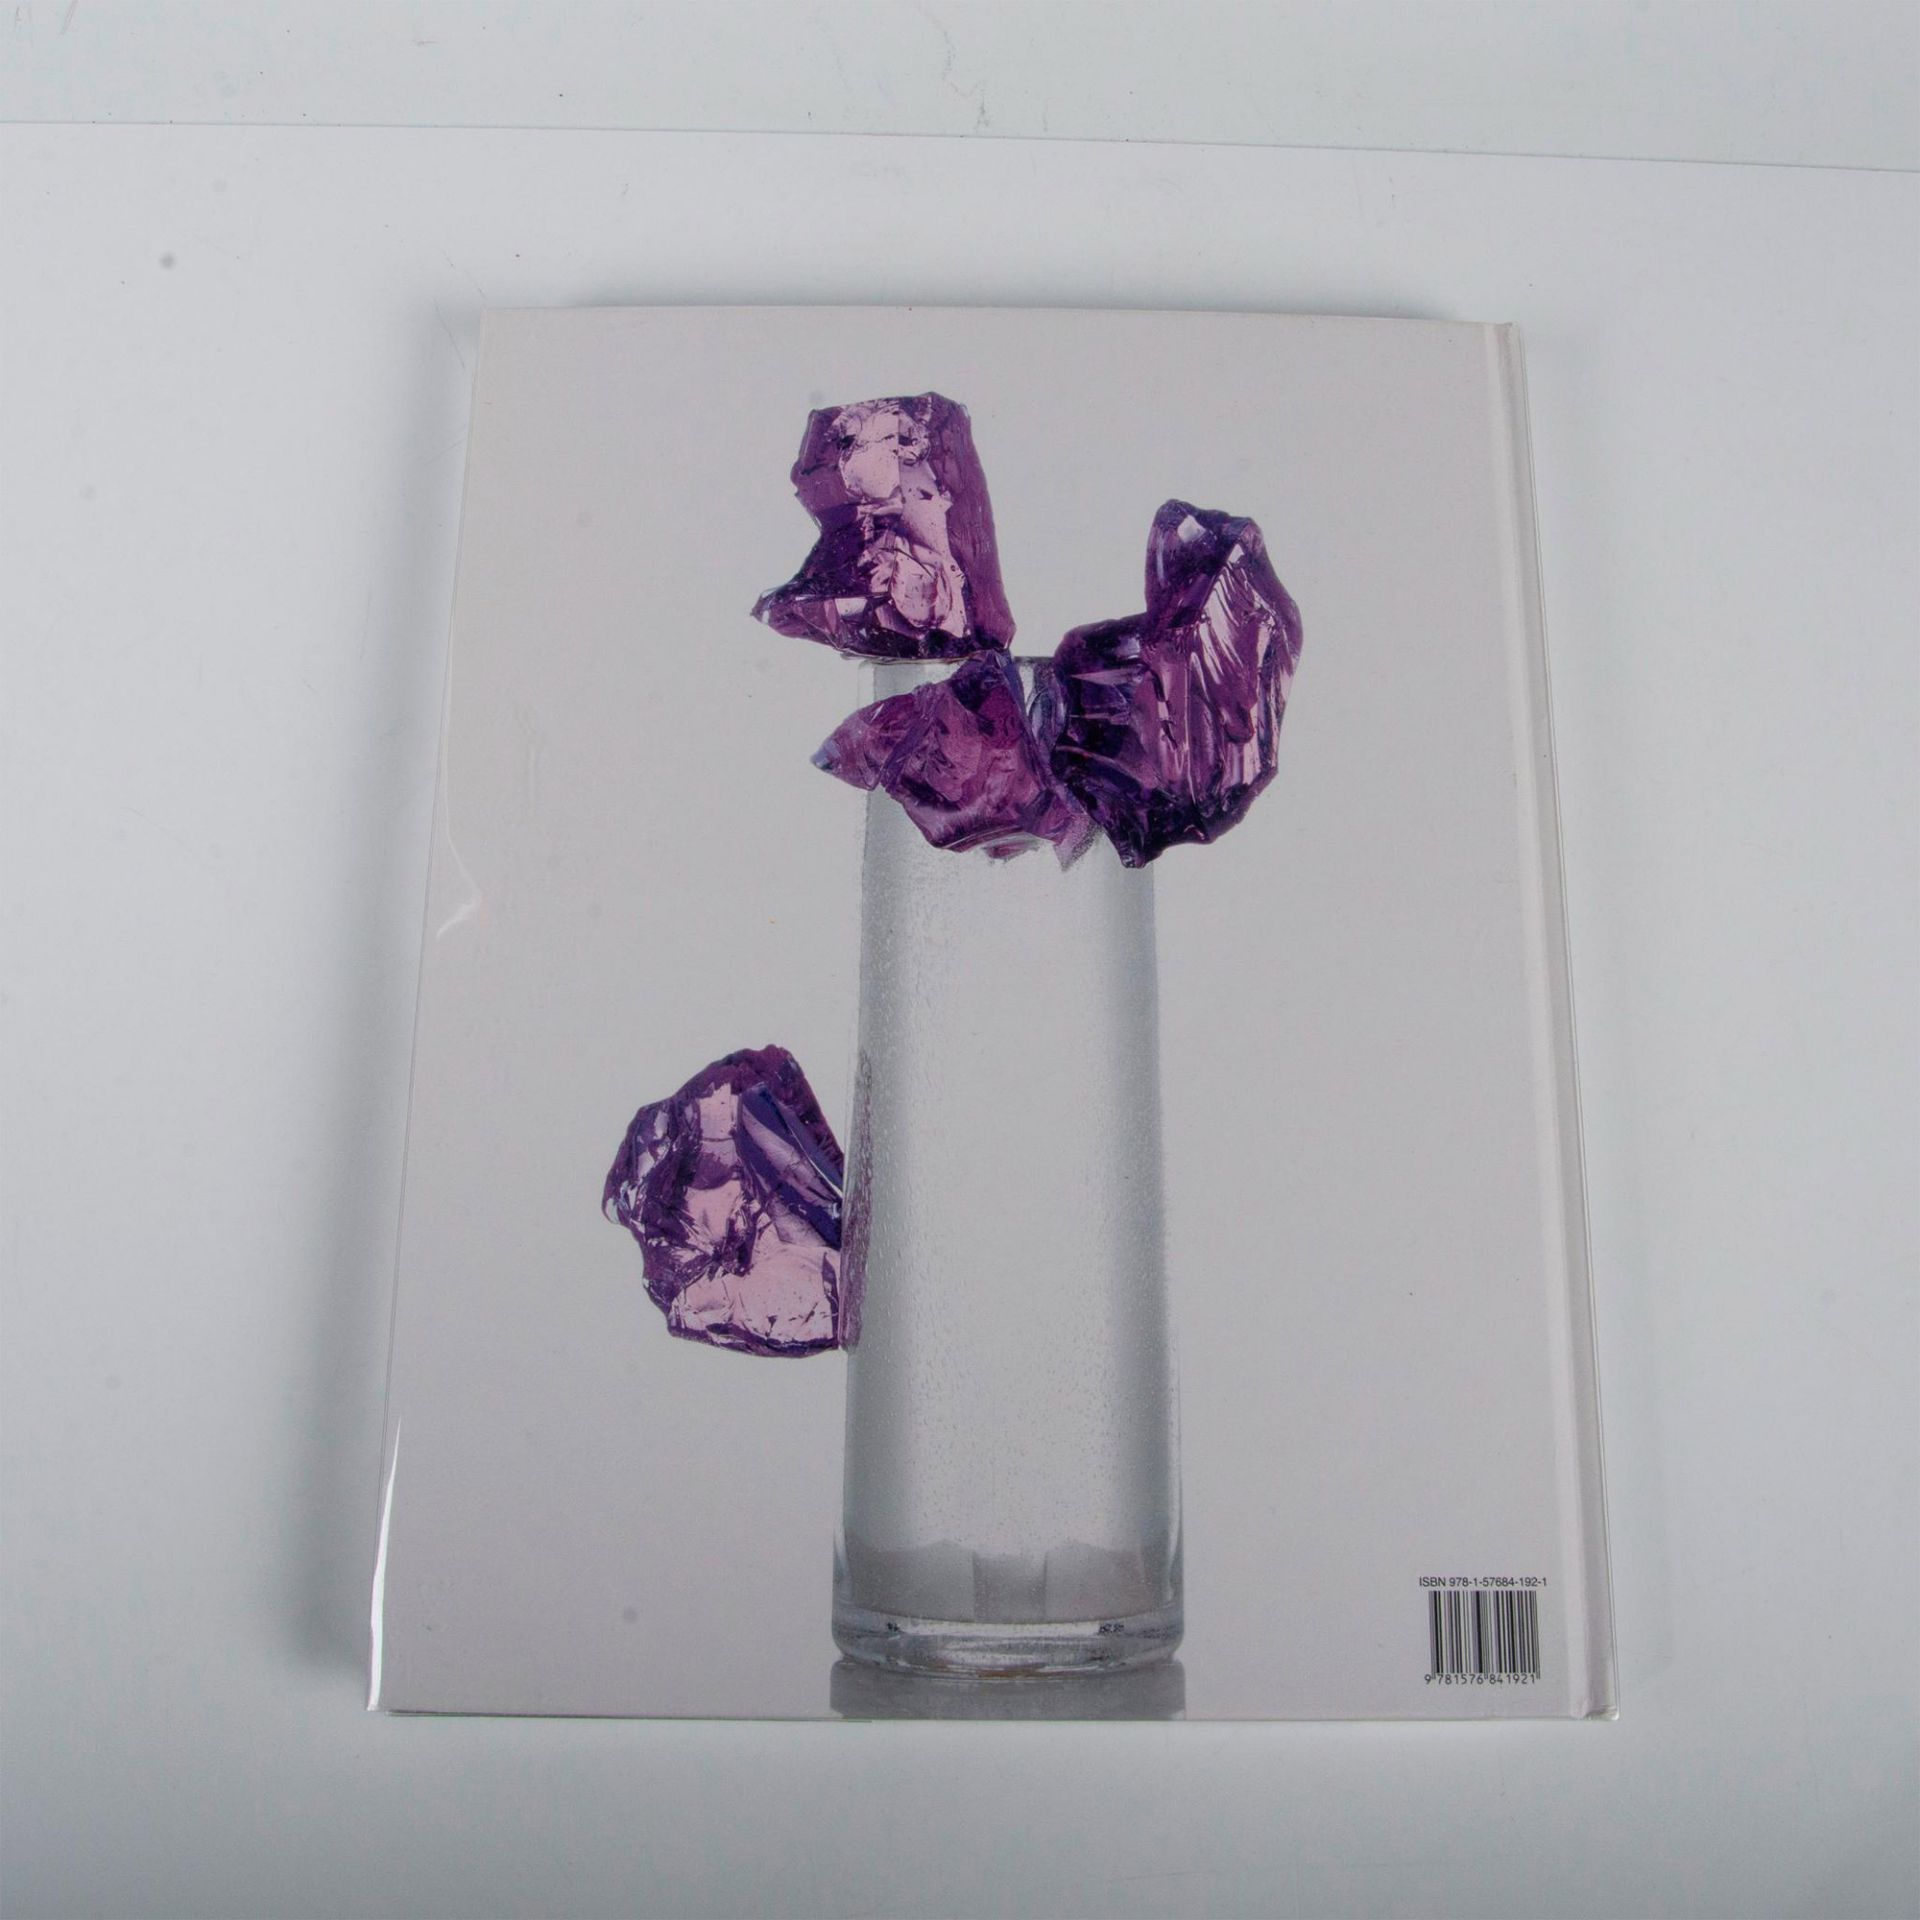 Dale Chihuly & Jennifer Opie, Chihuly Silvered, Signed Book - Image 9 of 10